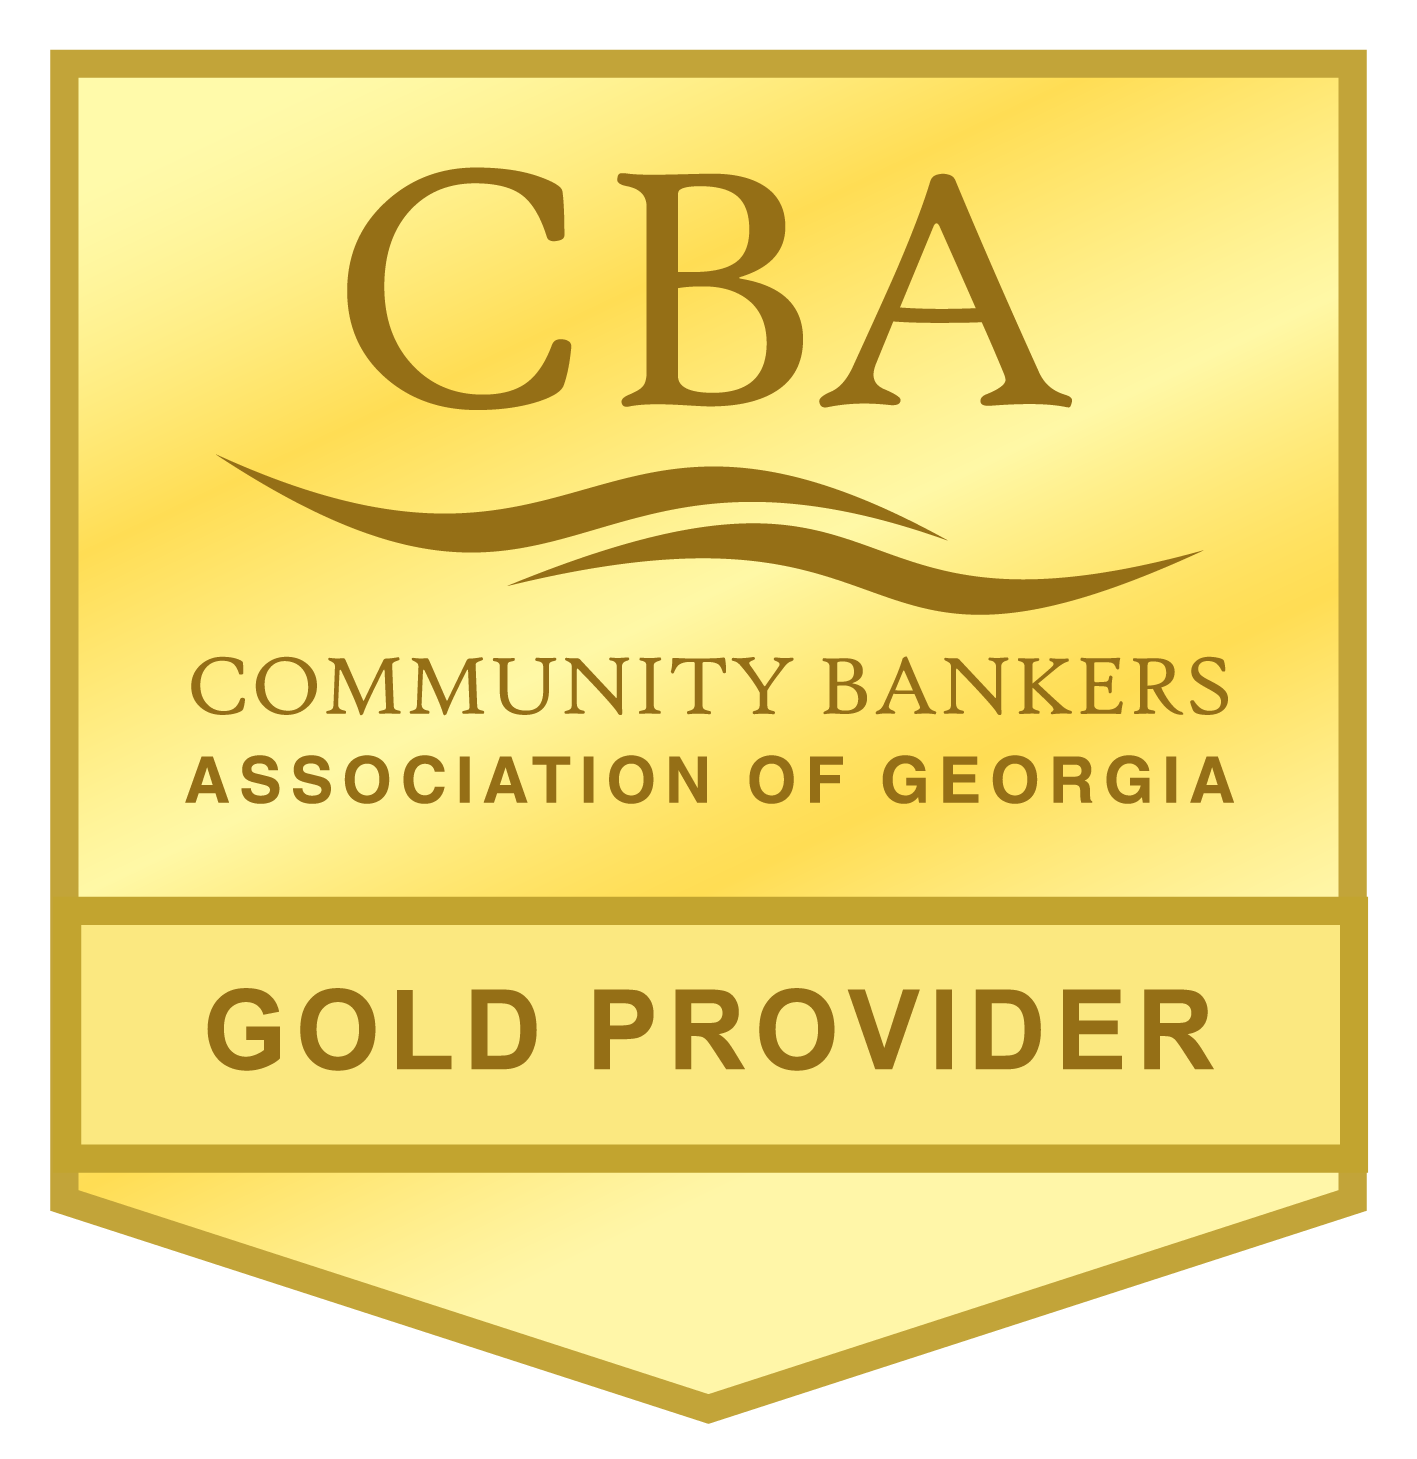 Community Bankers Association of Georgia - Gold Provider